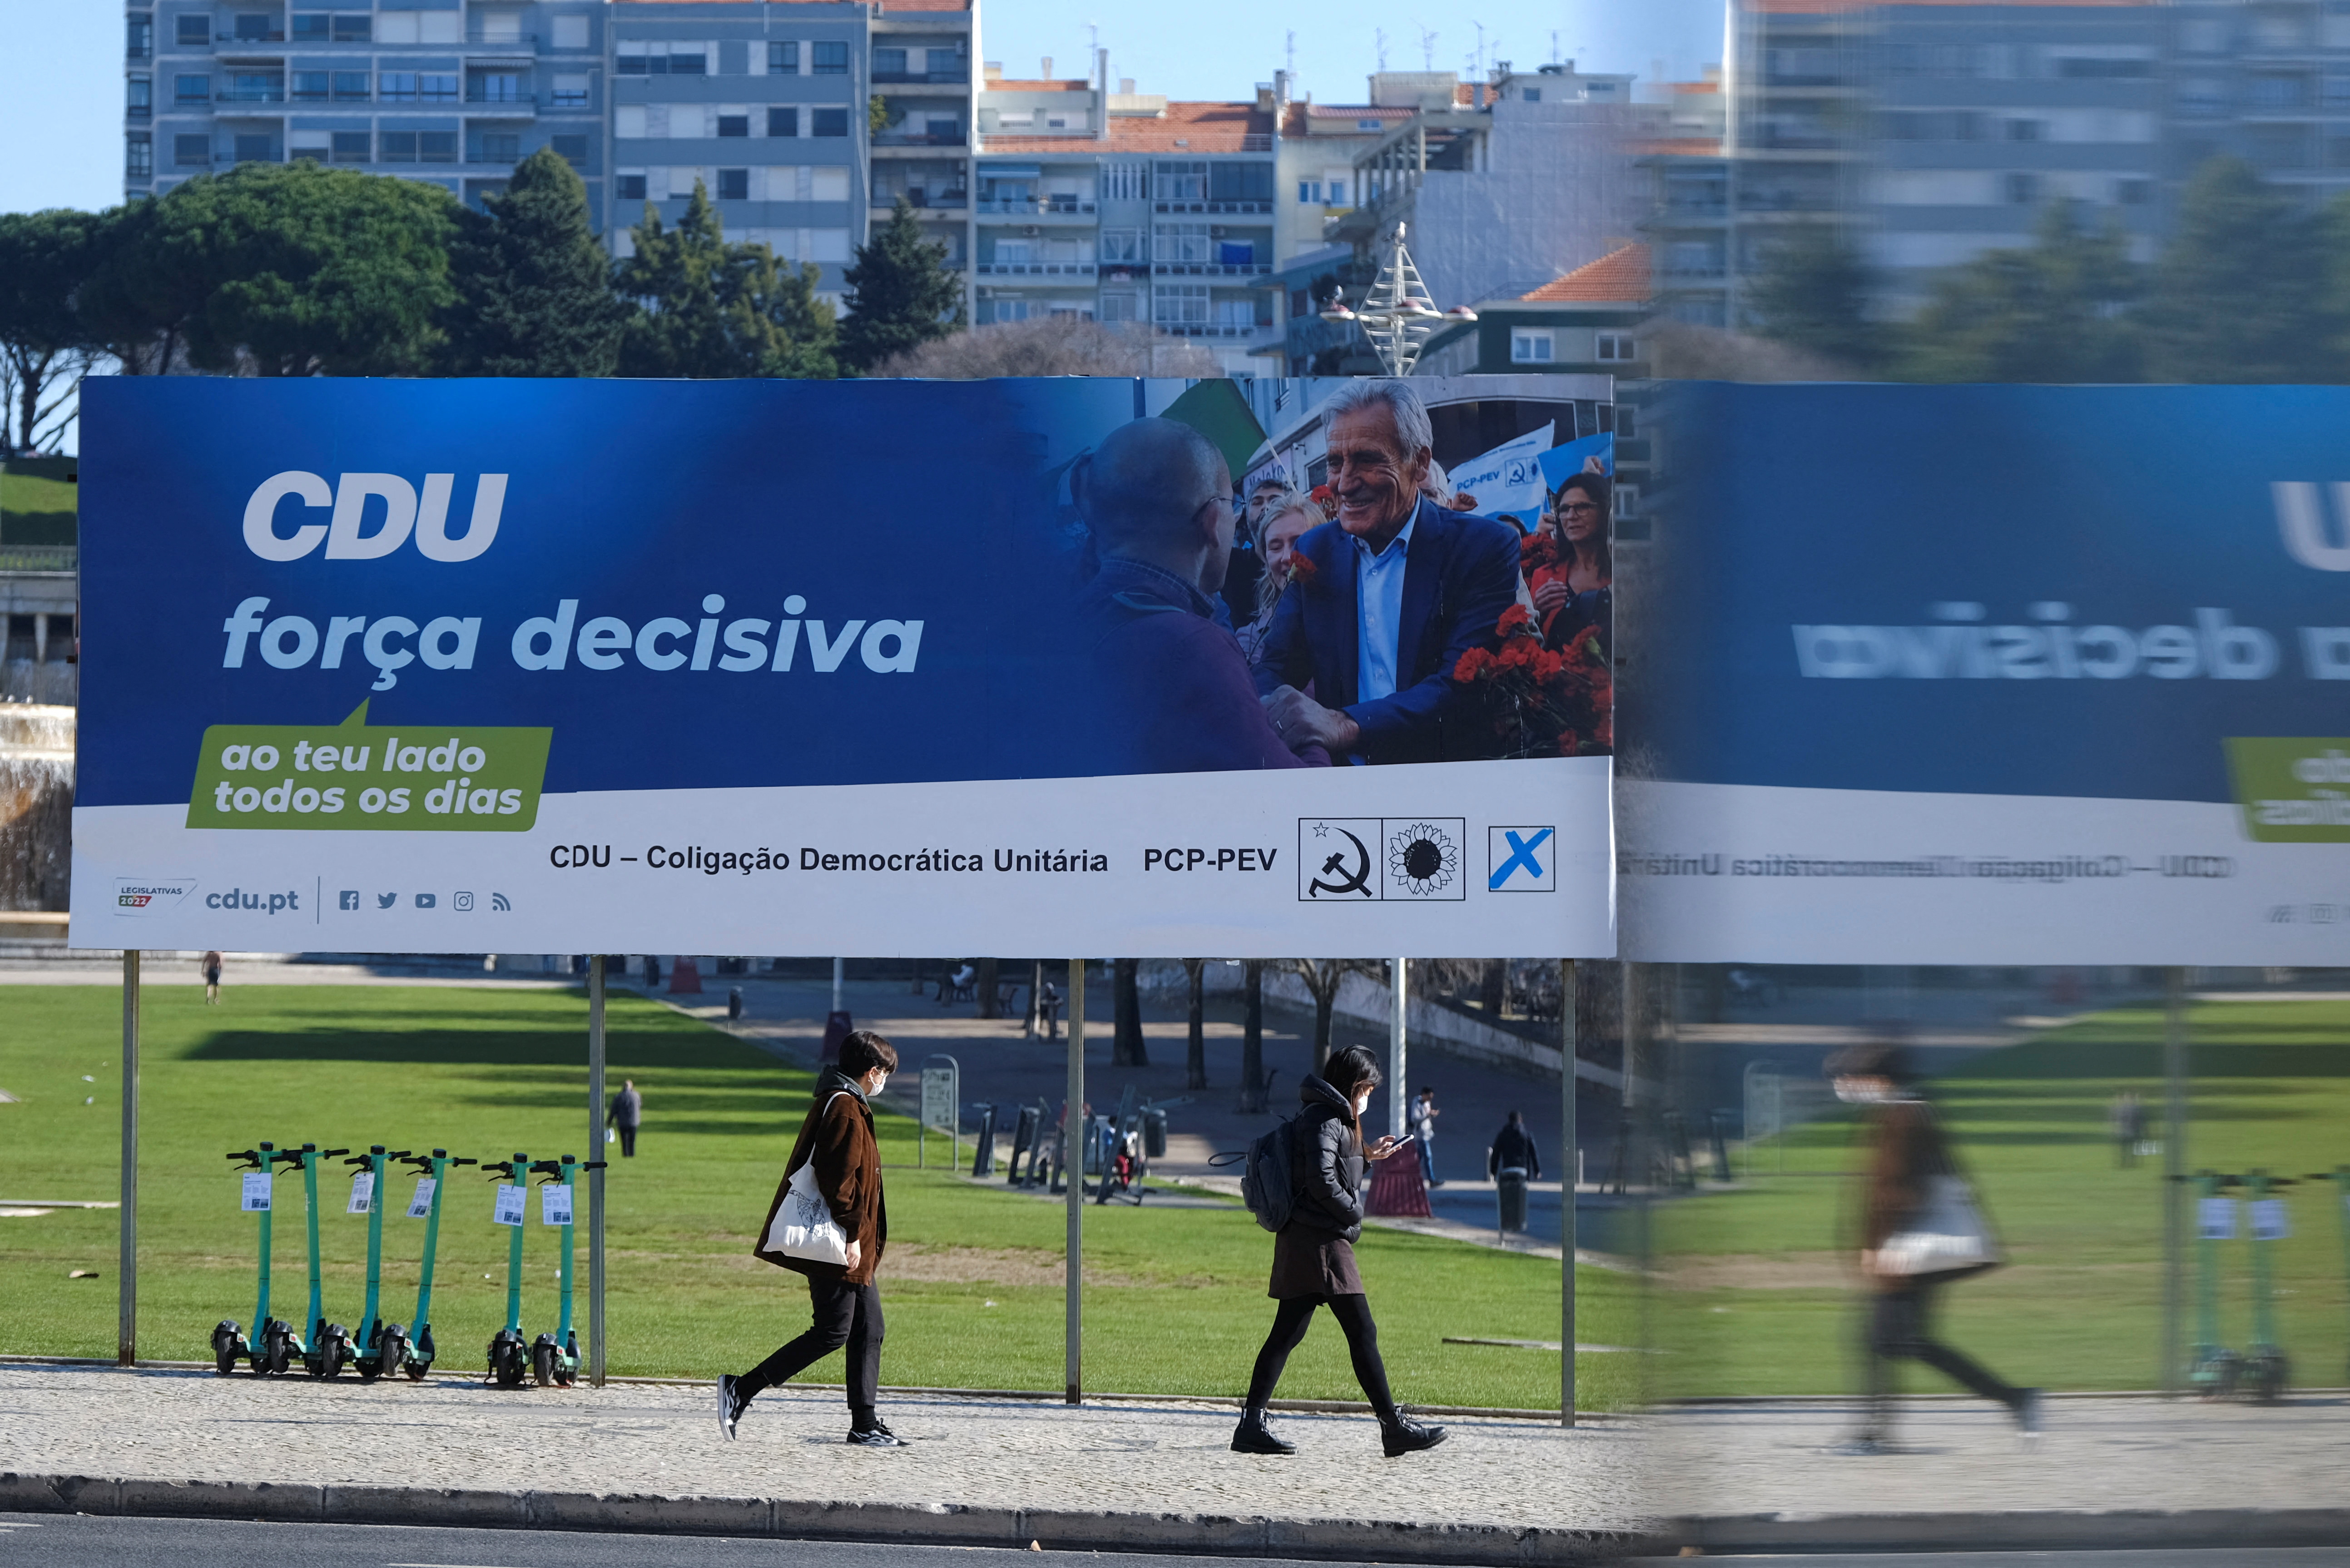 A CDU communist party billboard for the snap elections which is to take place on January 30 is seen in Lisbon